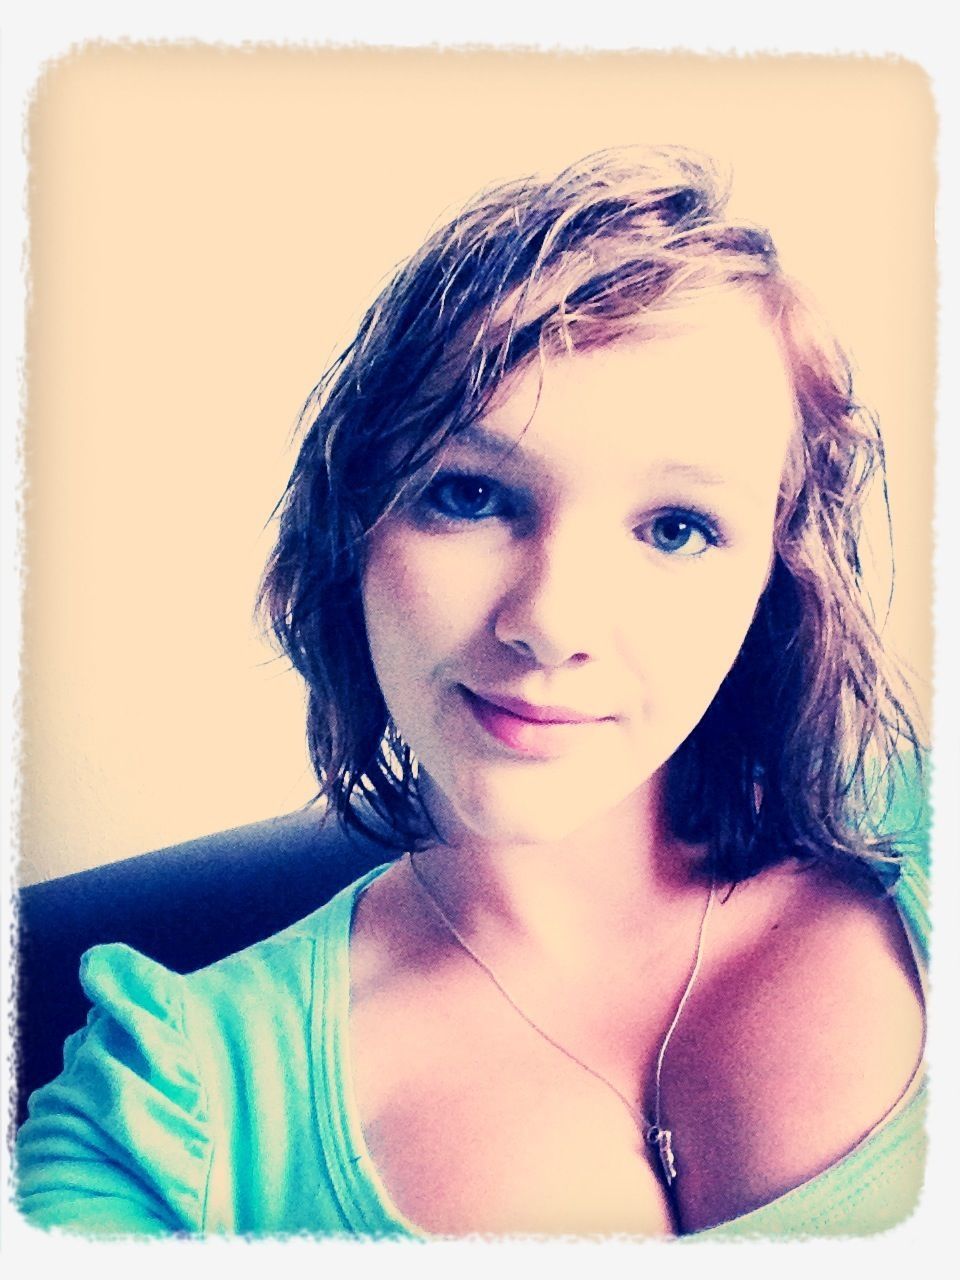 Playing round with new app :)